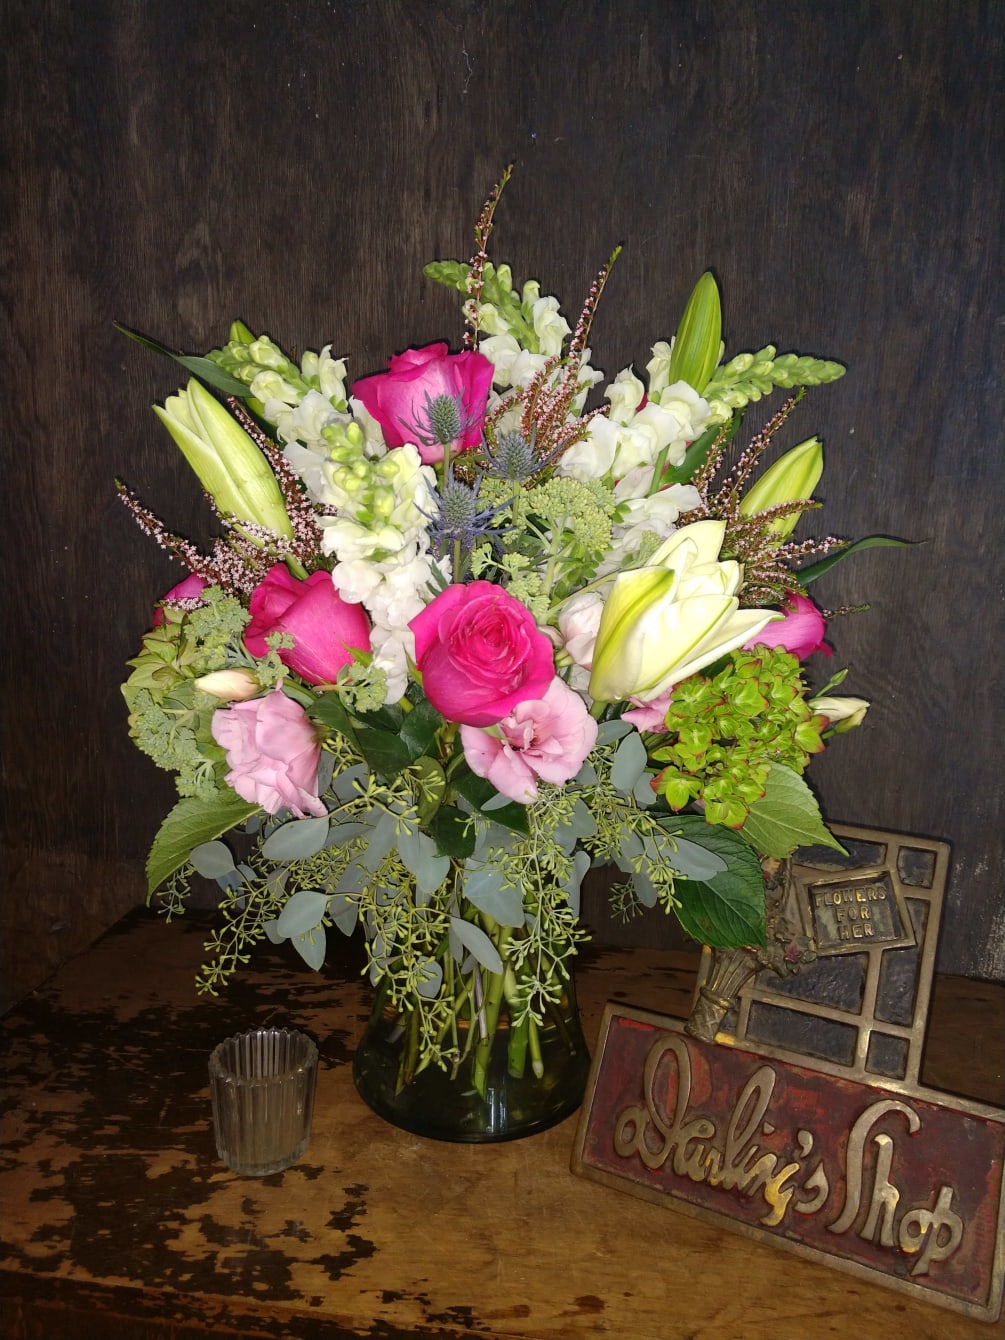 Featuring hot pink roses, pink Lisianthus, lilies, green hydrangeas and more. A